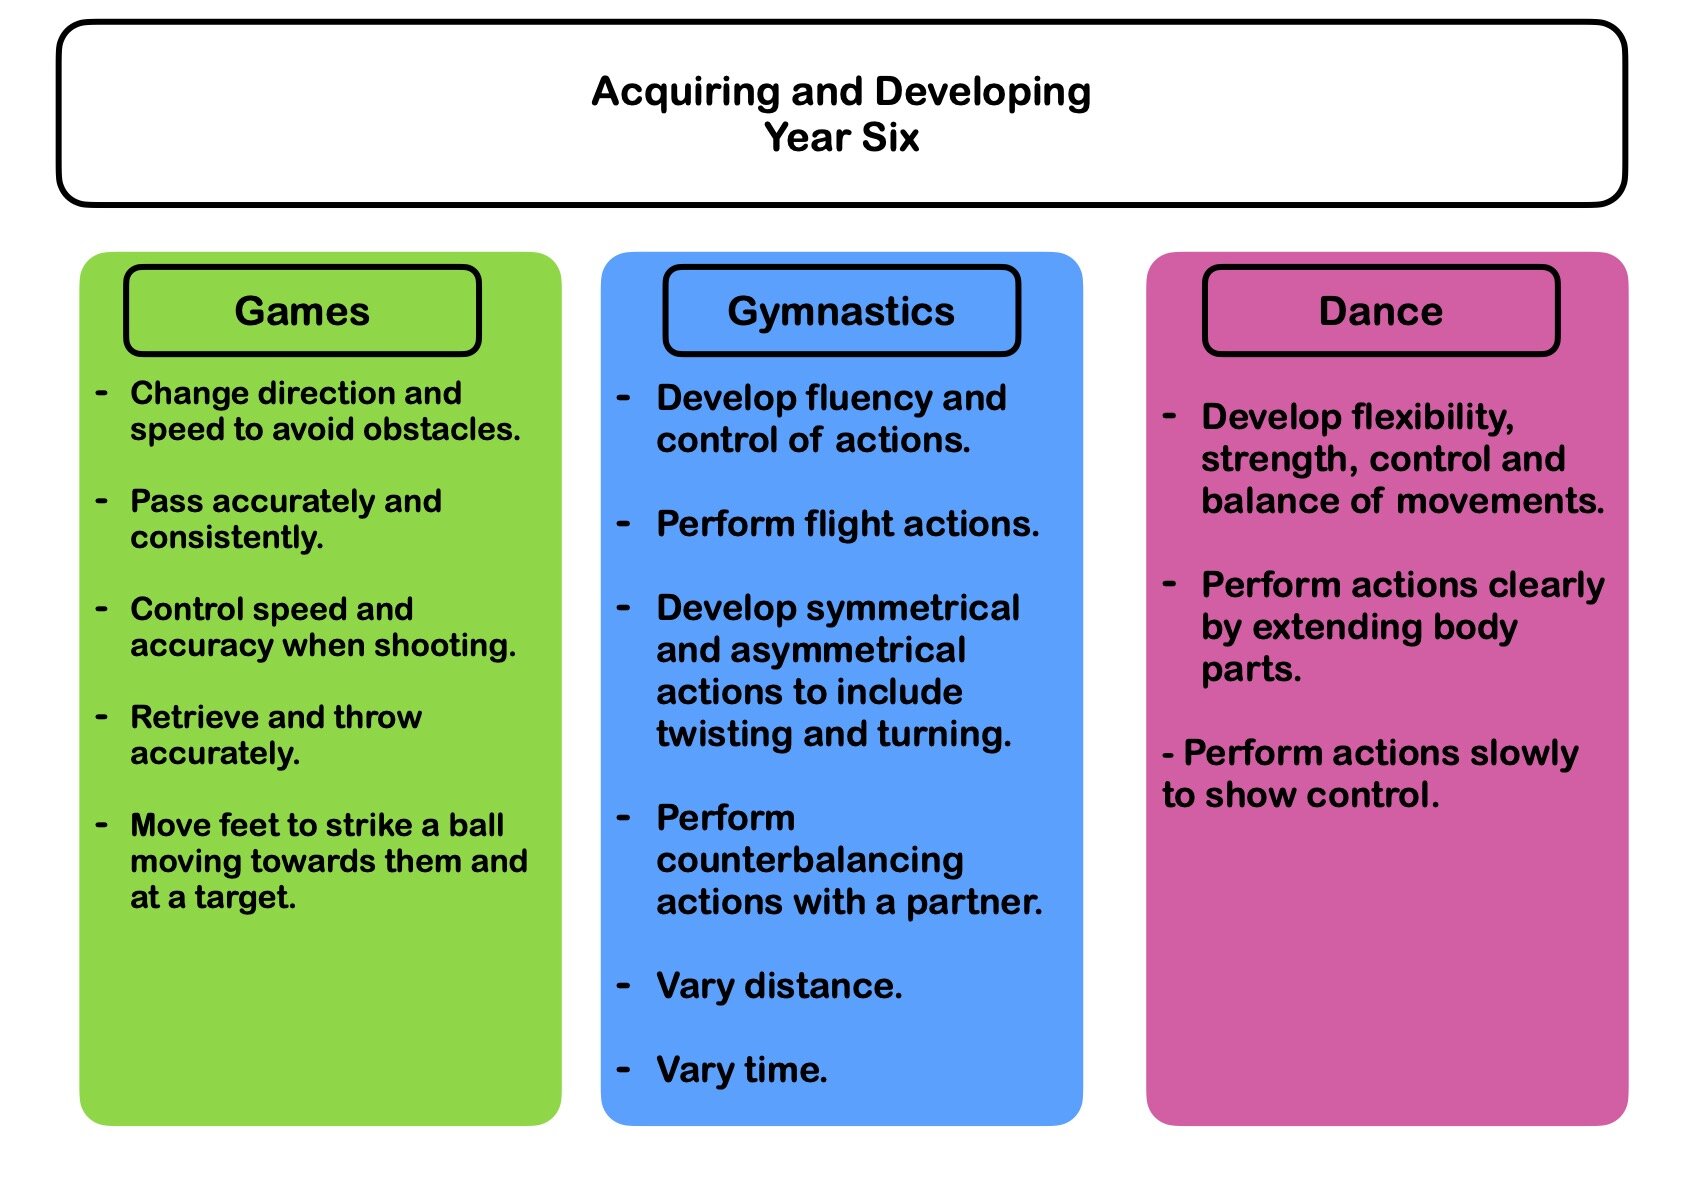 Physical Education Acquiring and Developing